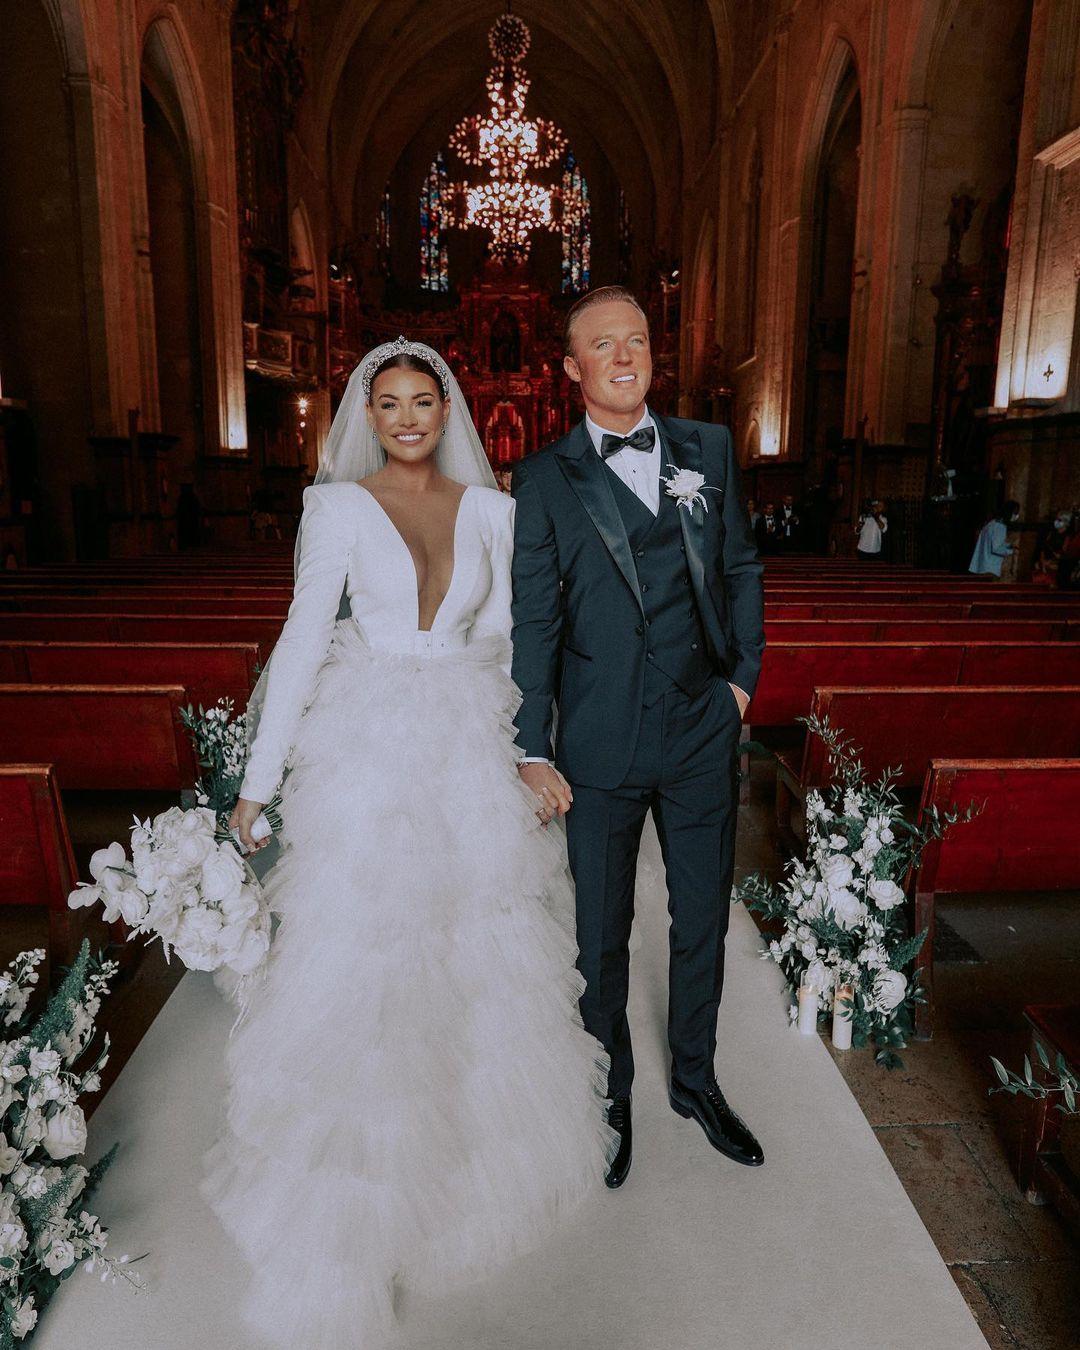 The Most Beautiful Celebrity Wedding Dresses Of The Past Decade